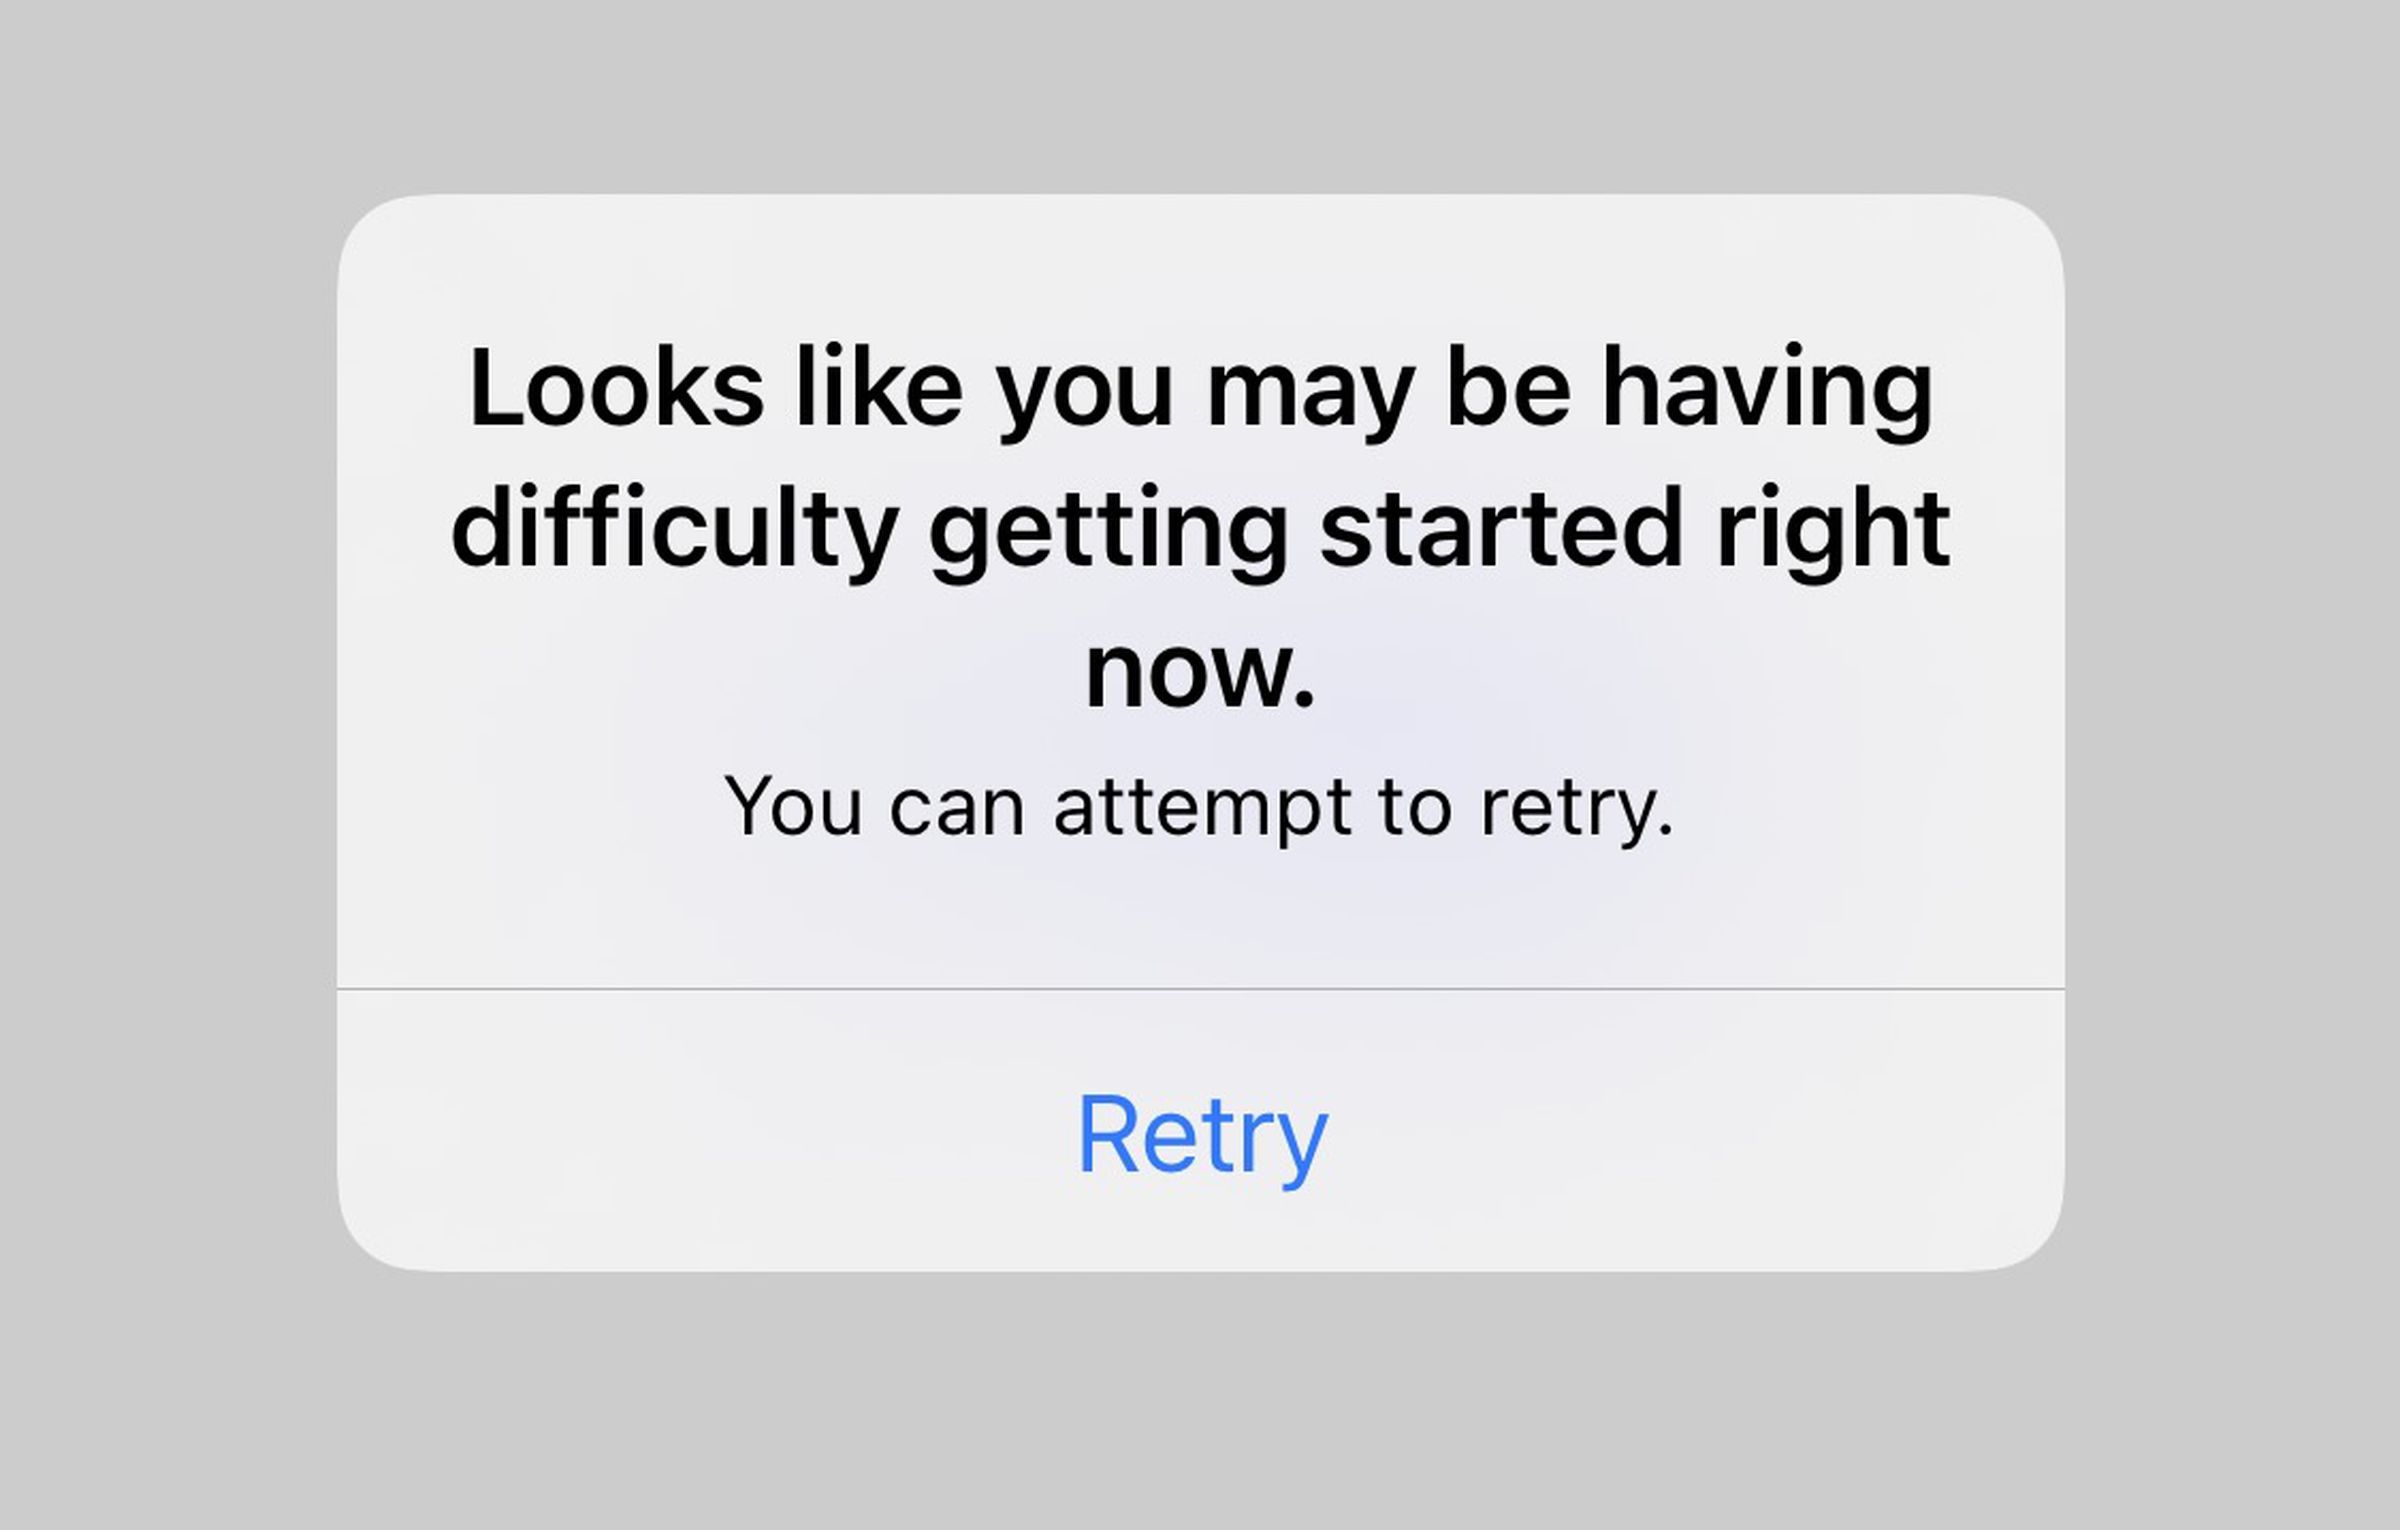 The error message I received earlier trying to log into the app.